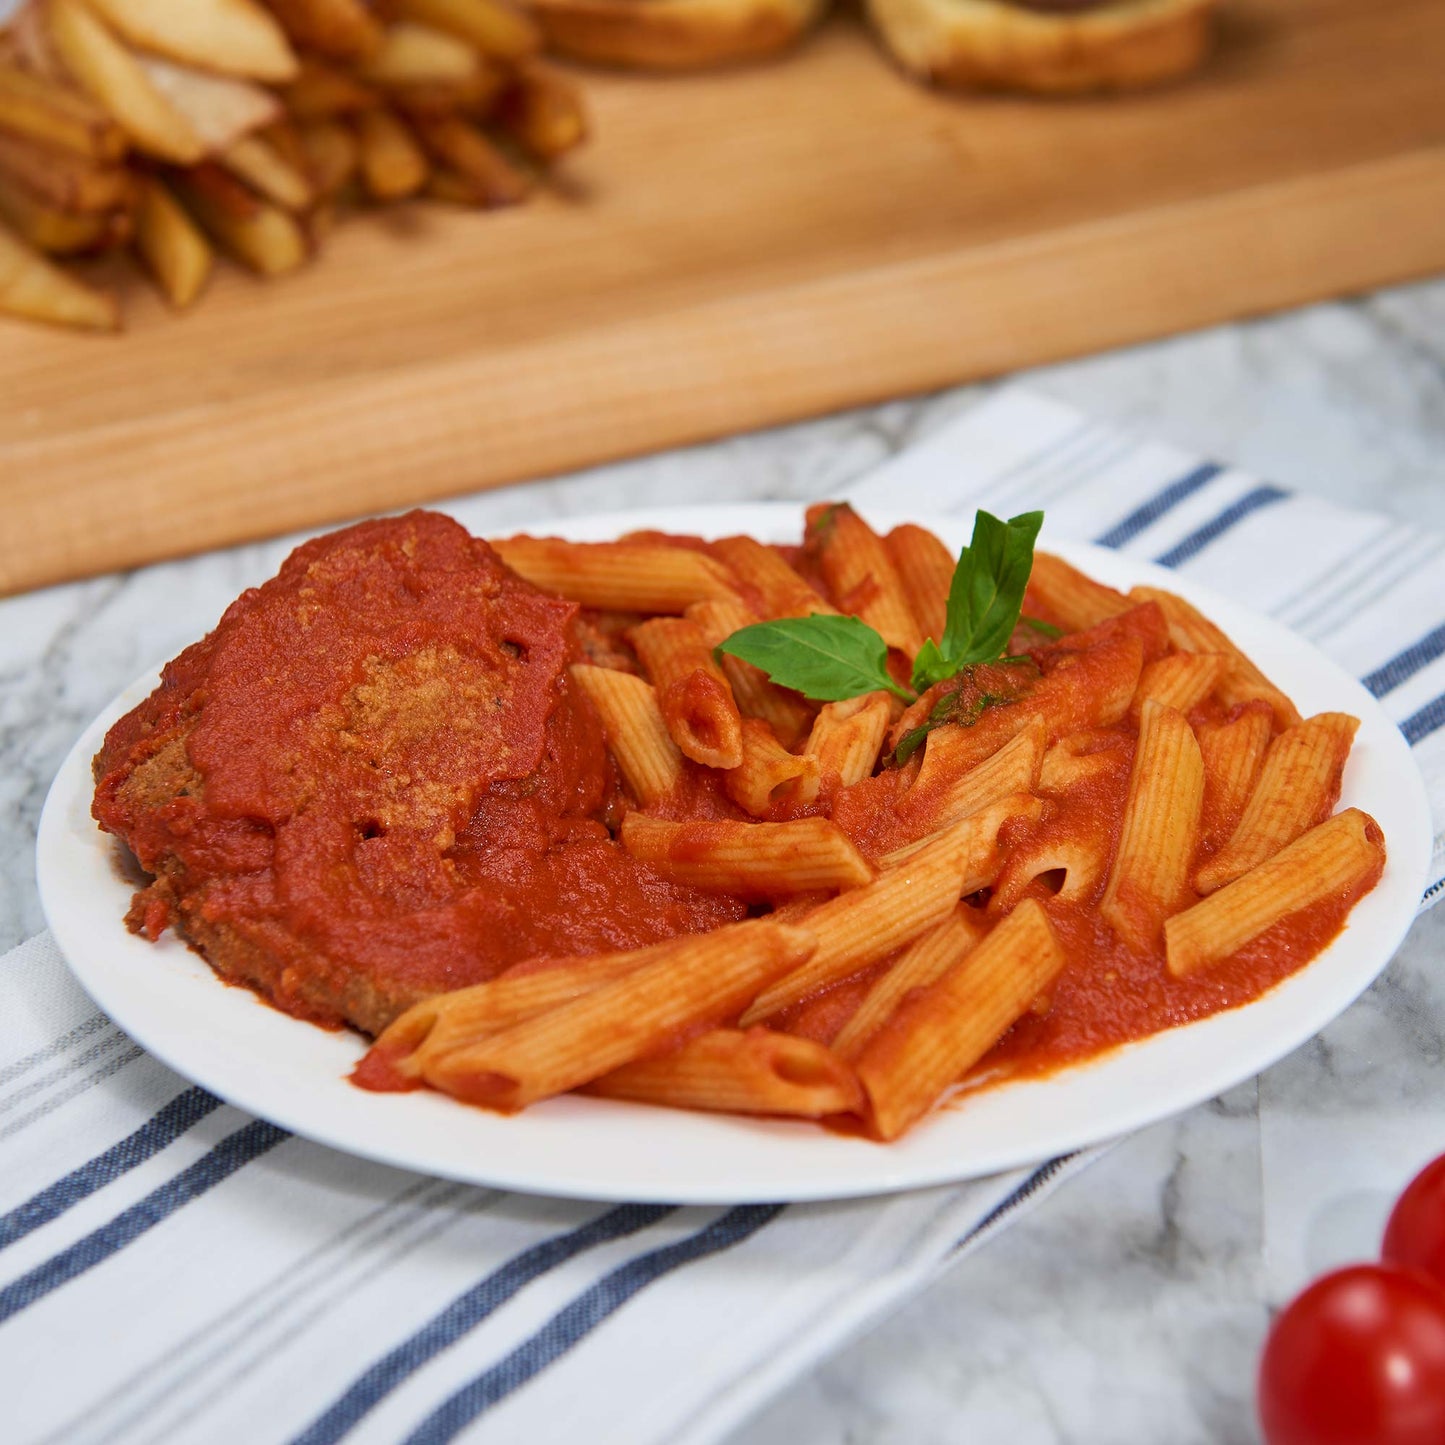 Penne Pasta with Tomato Sauce and Veal Cutlet